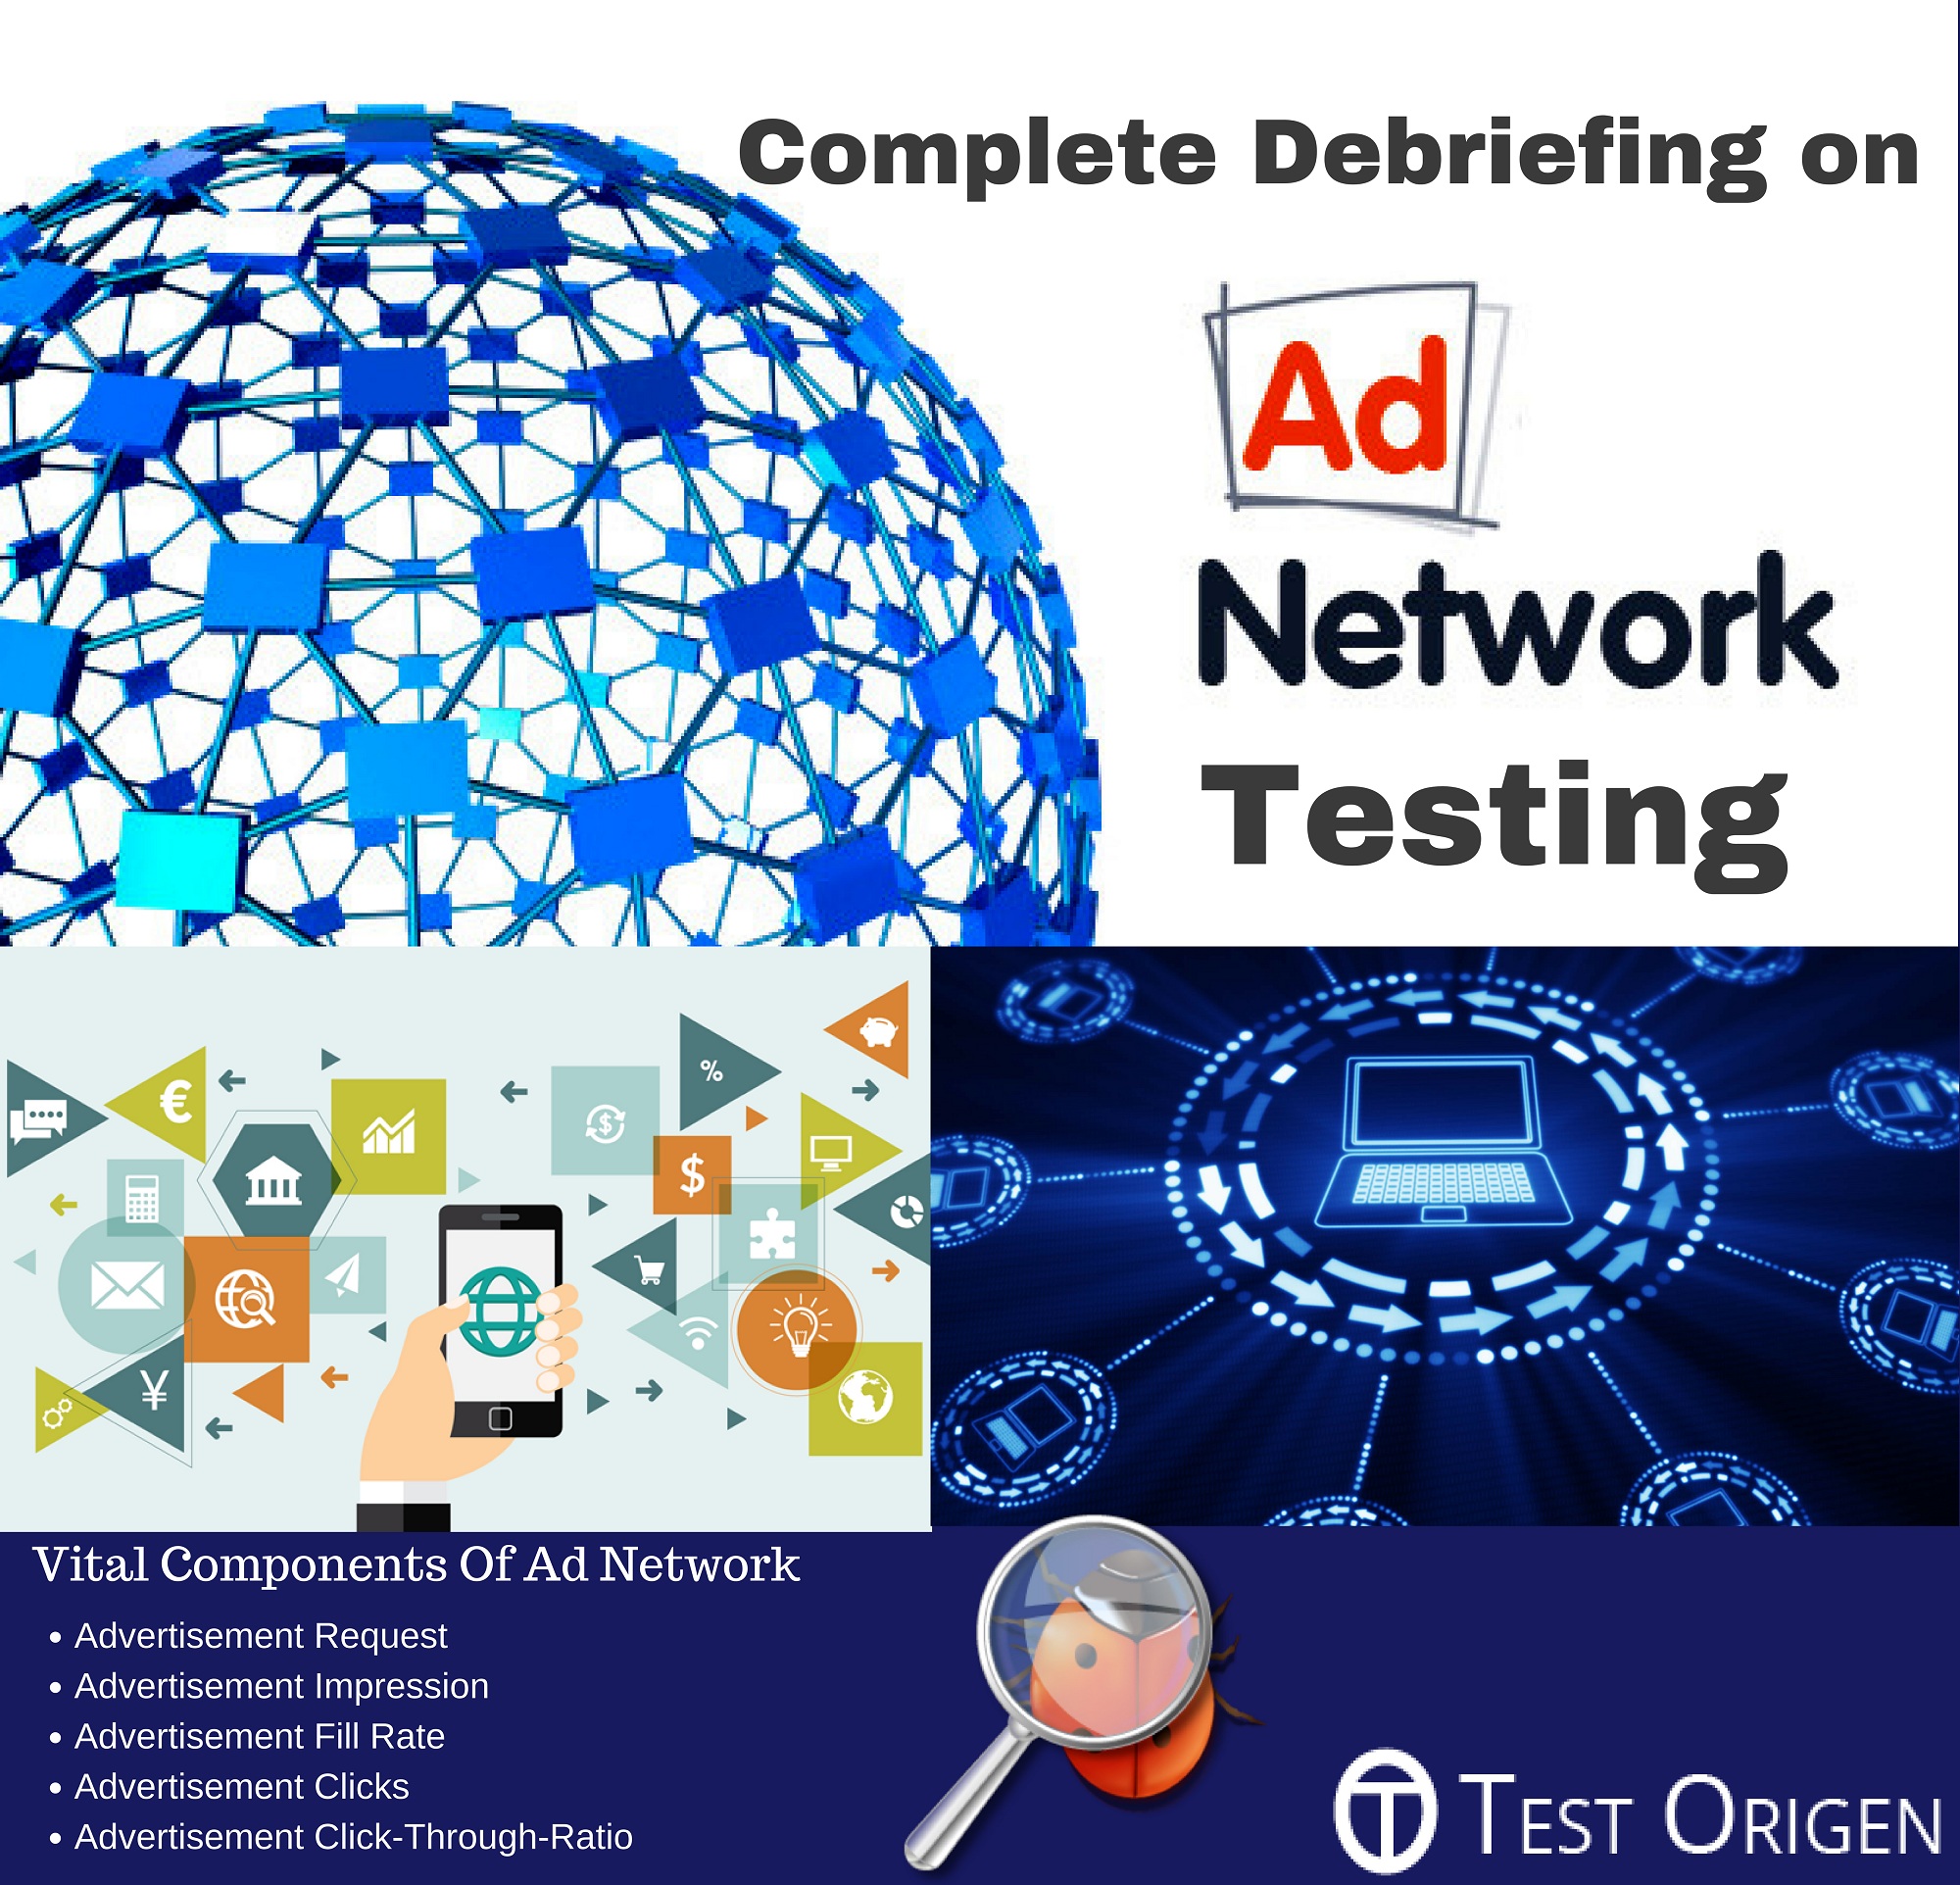 Complete Debriefing on Ad Network Testing